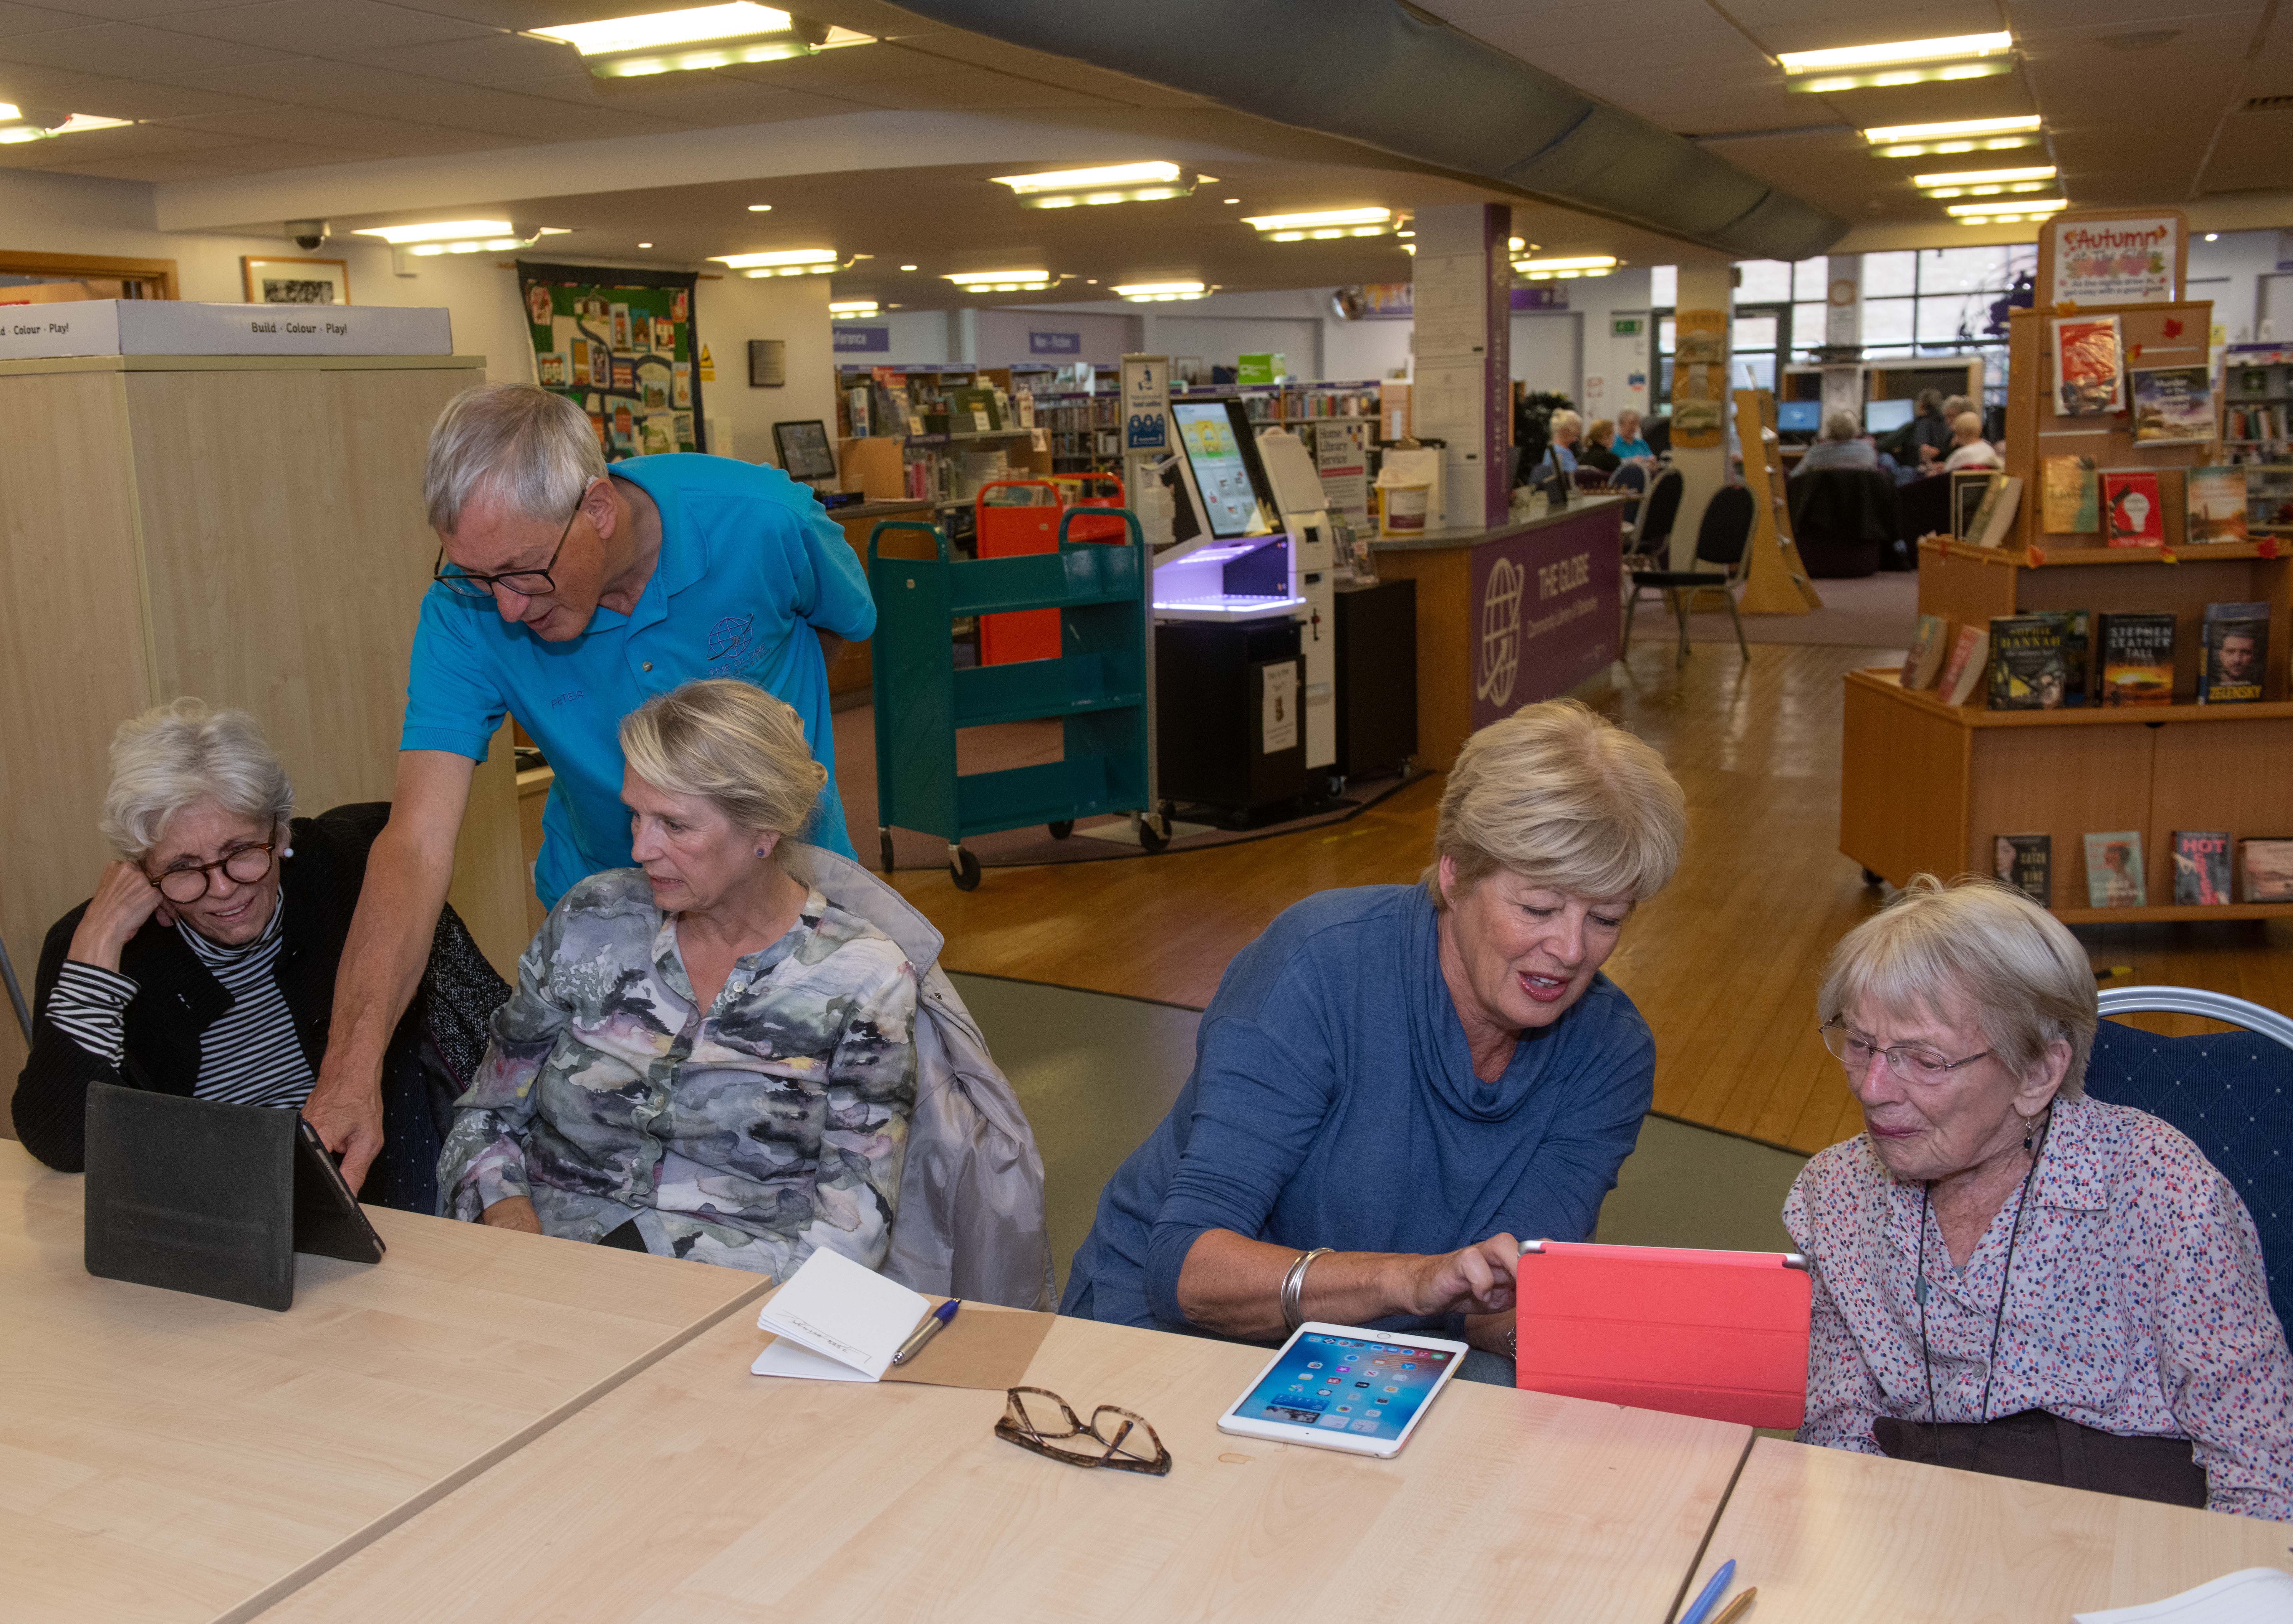 An IT session at Stokesley library